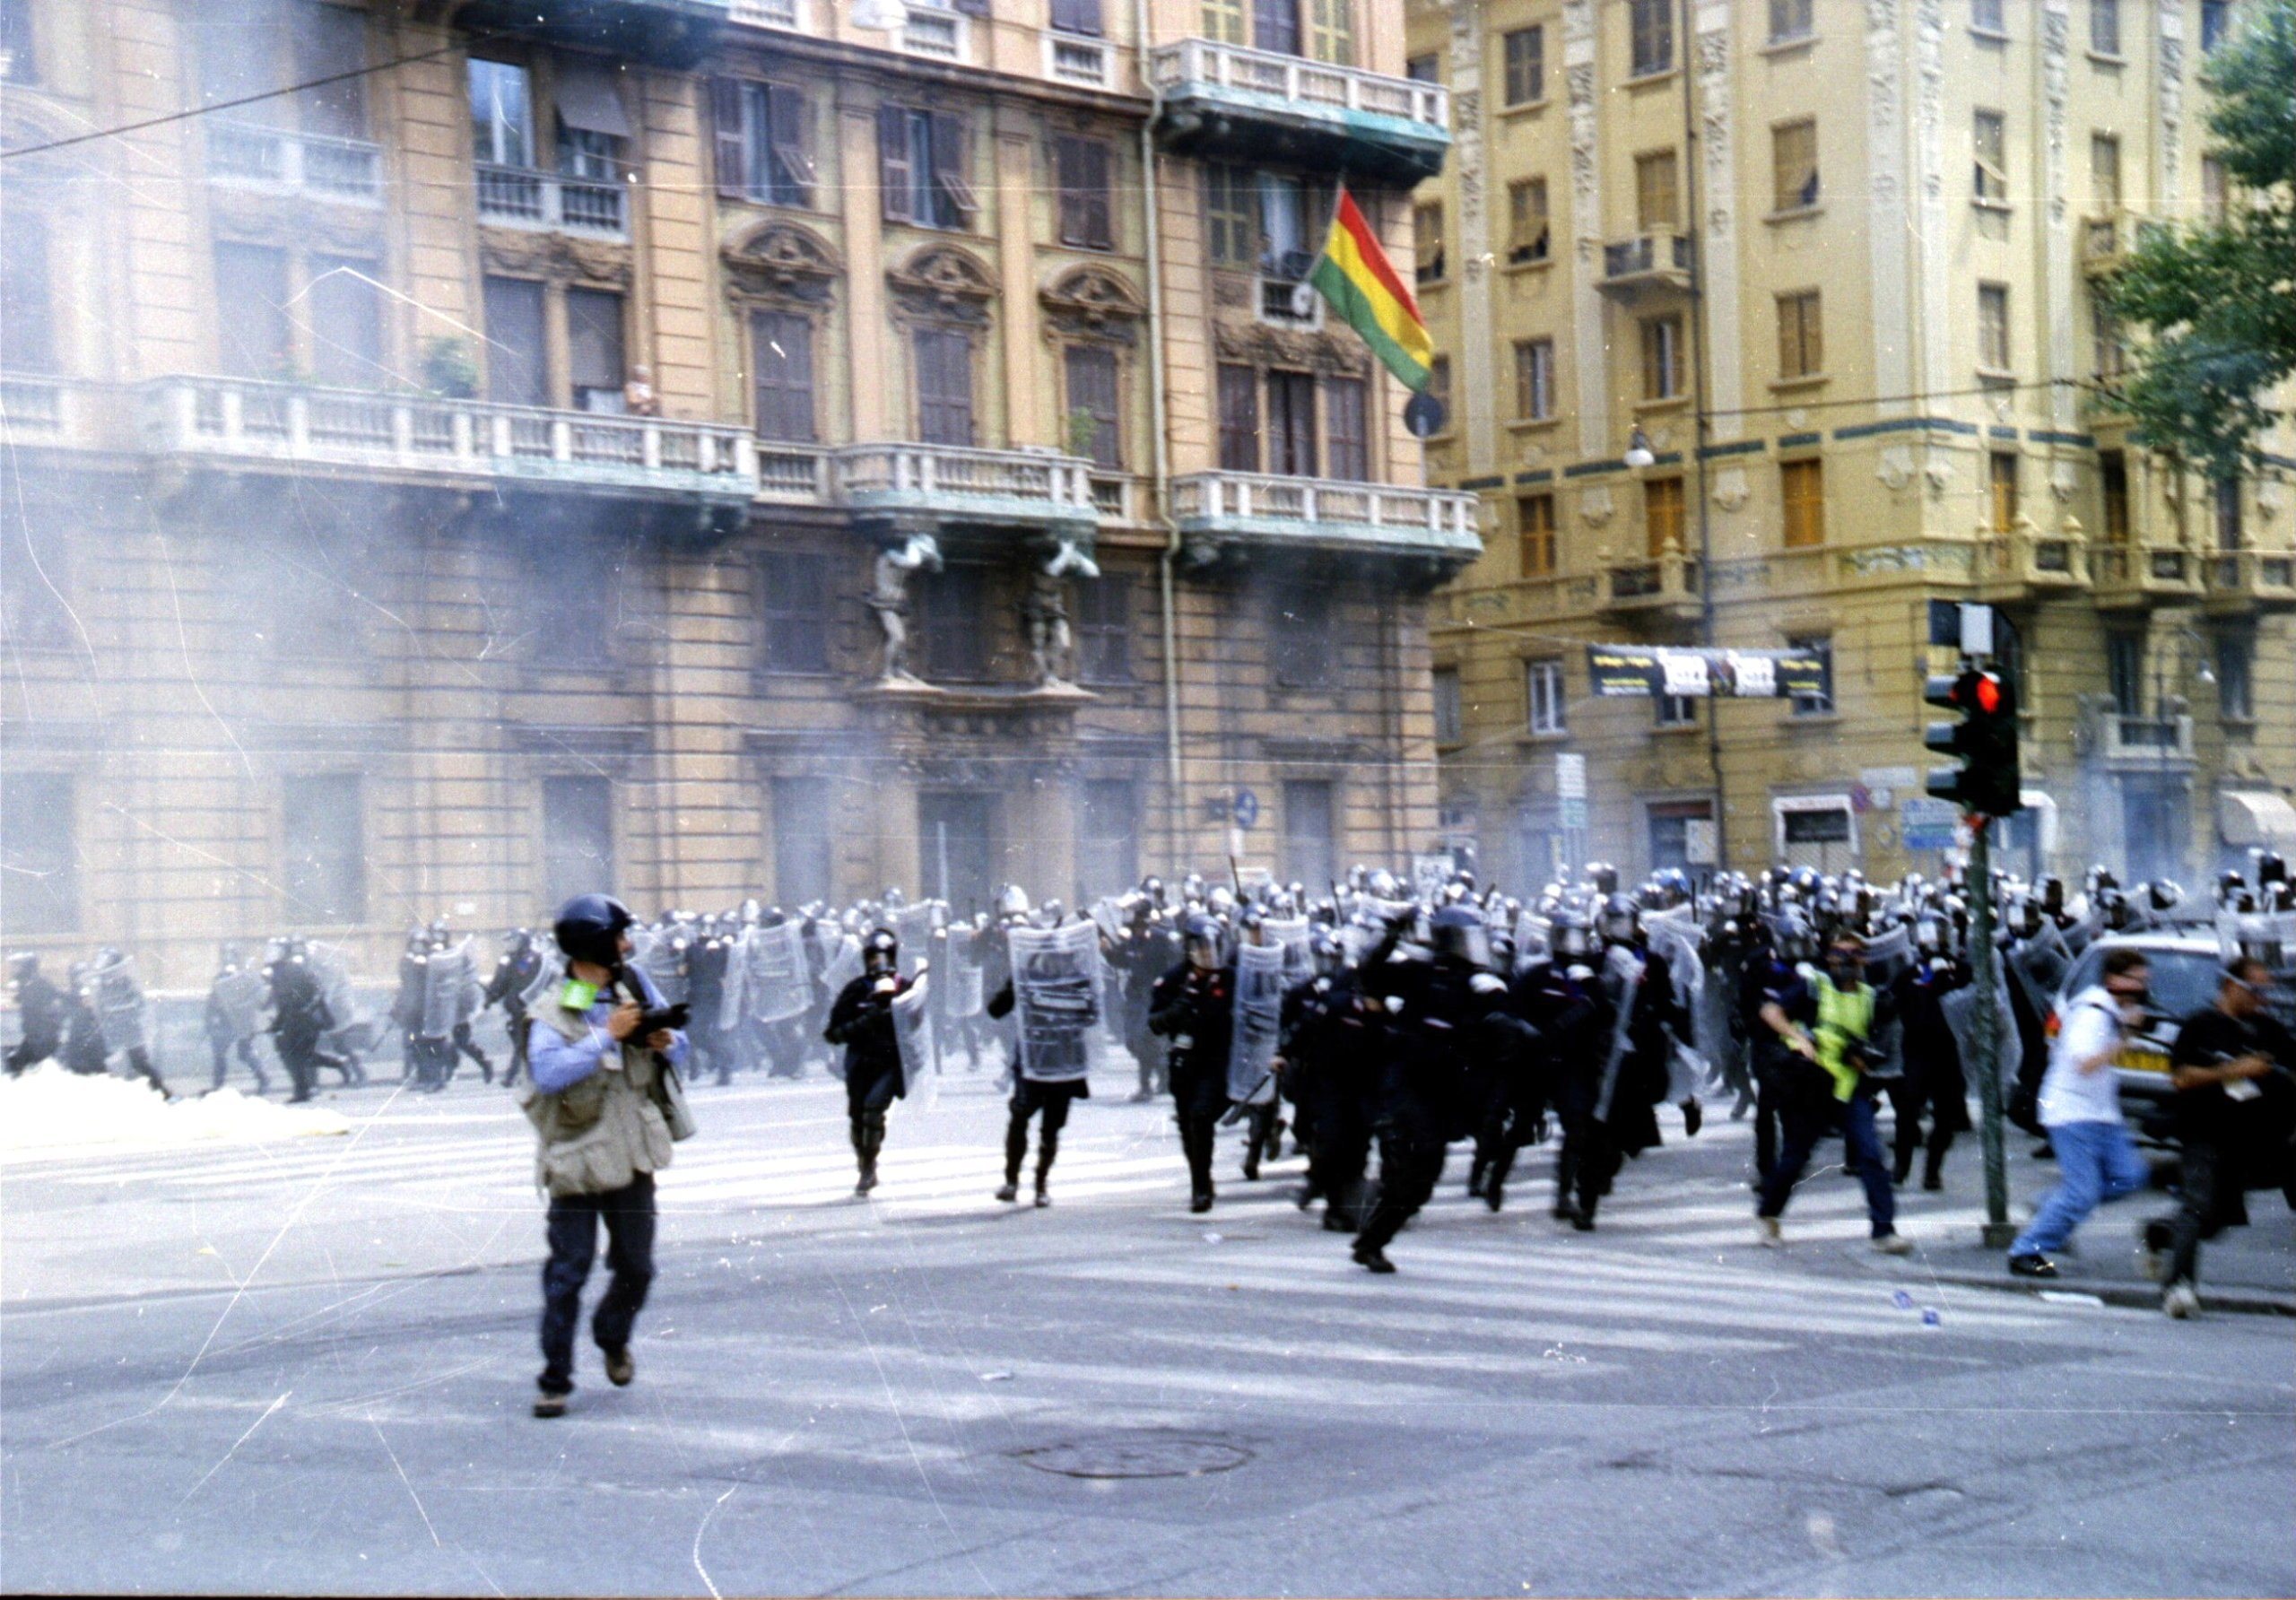 Police violently attack protesters outside the G8 summit in Genoa, Italy in July 2001